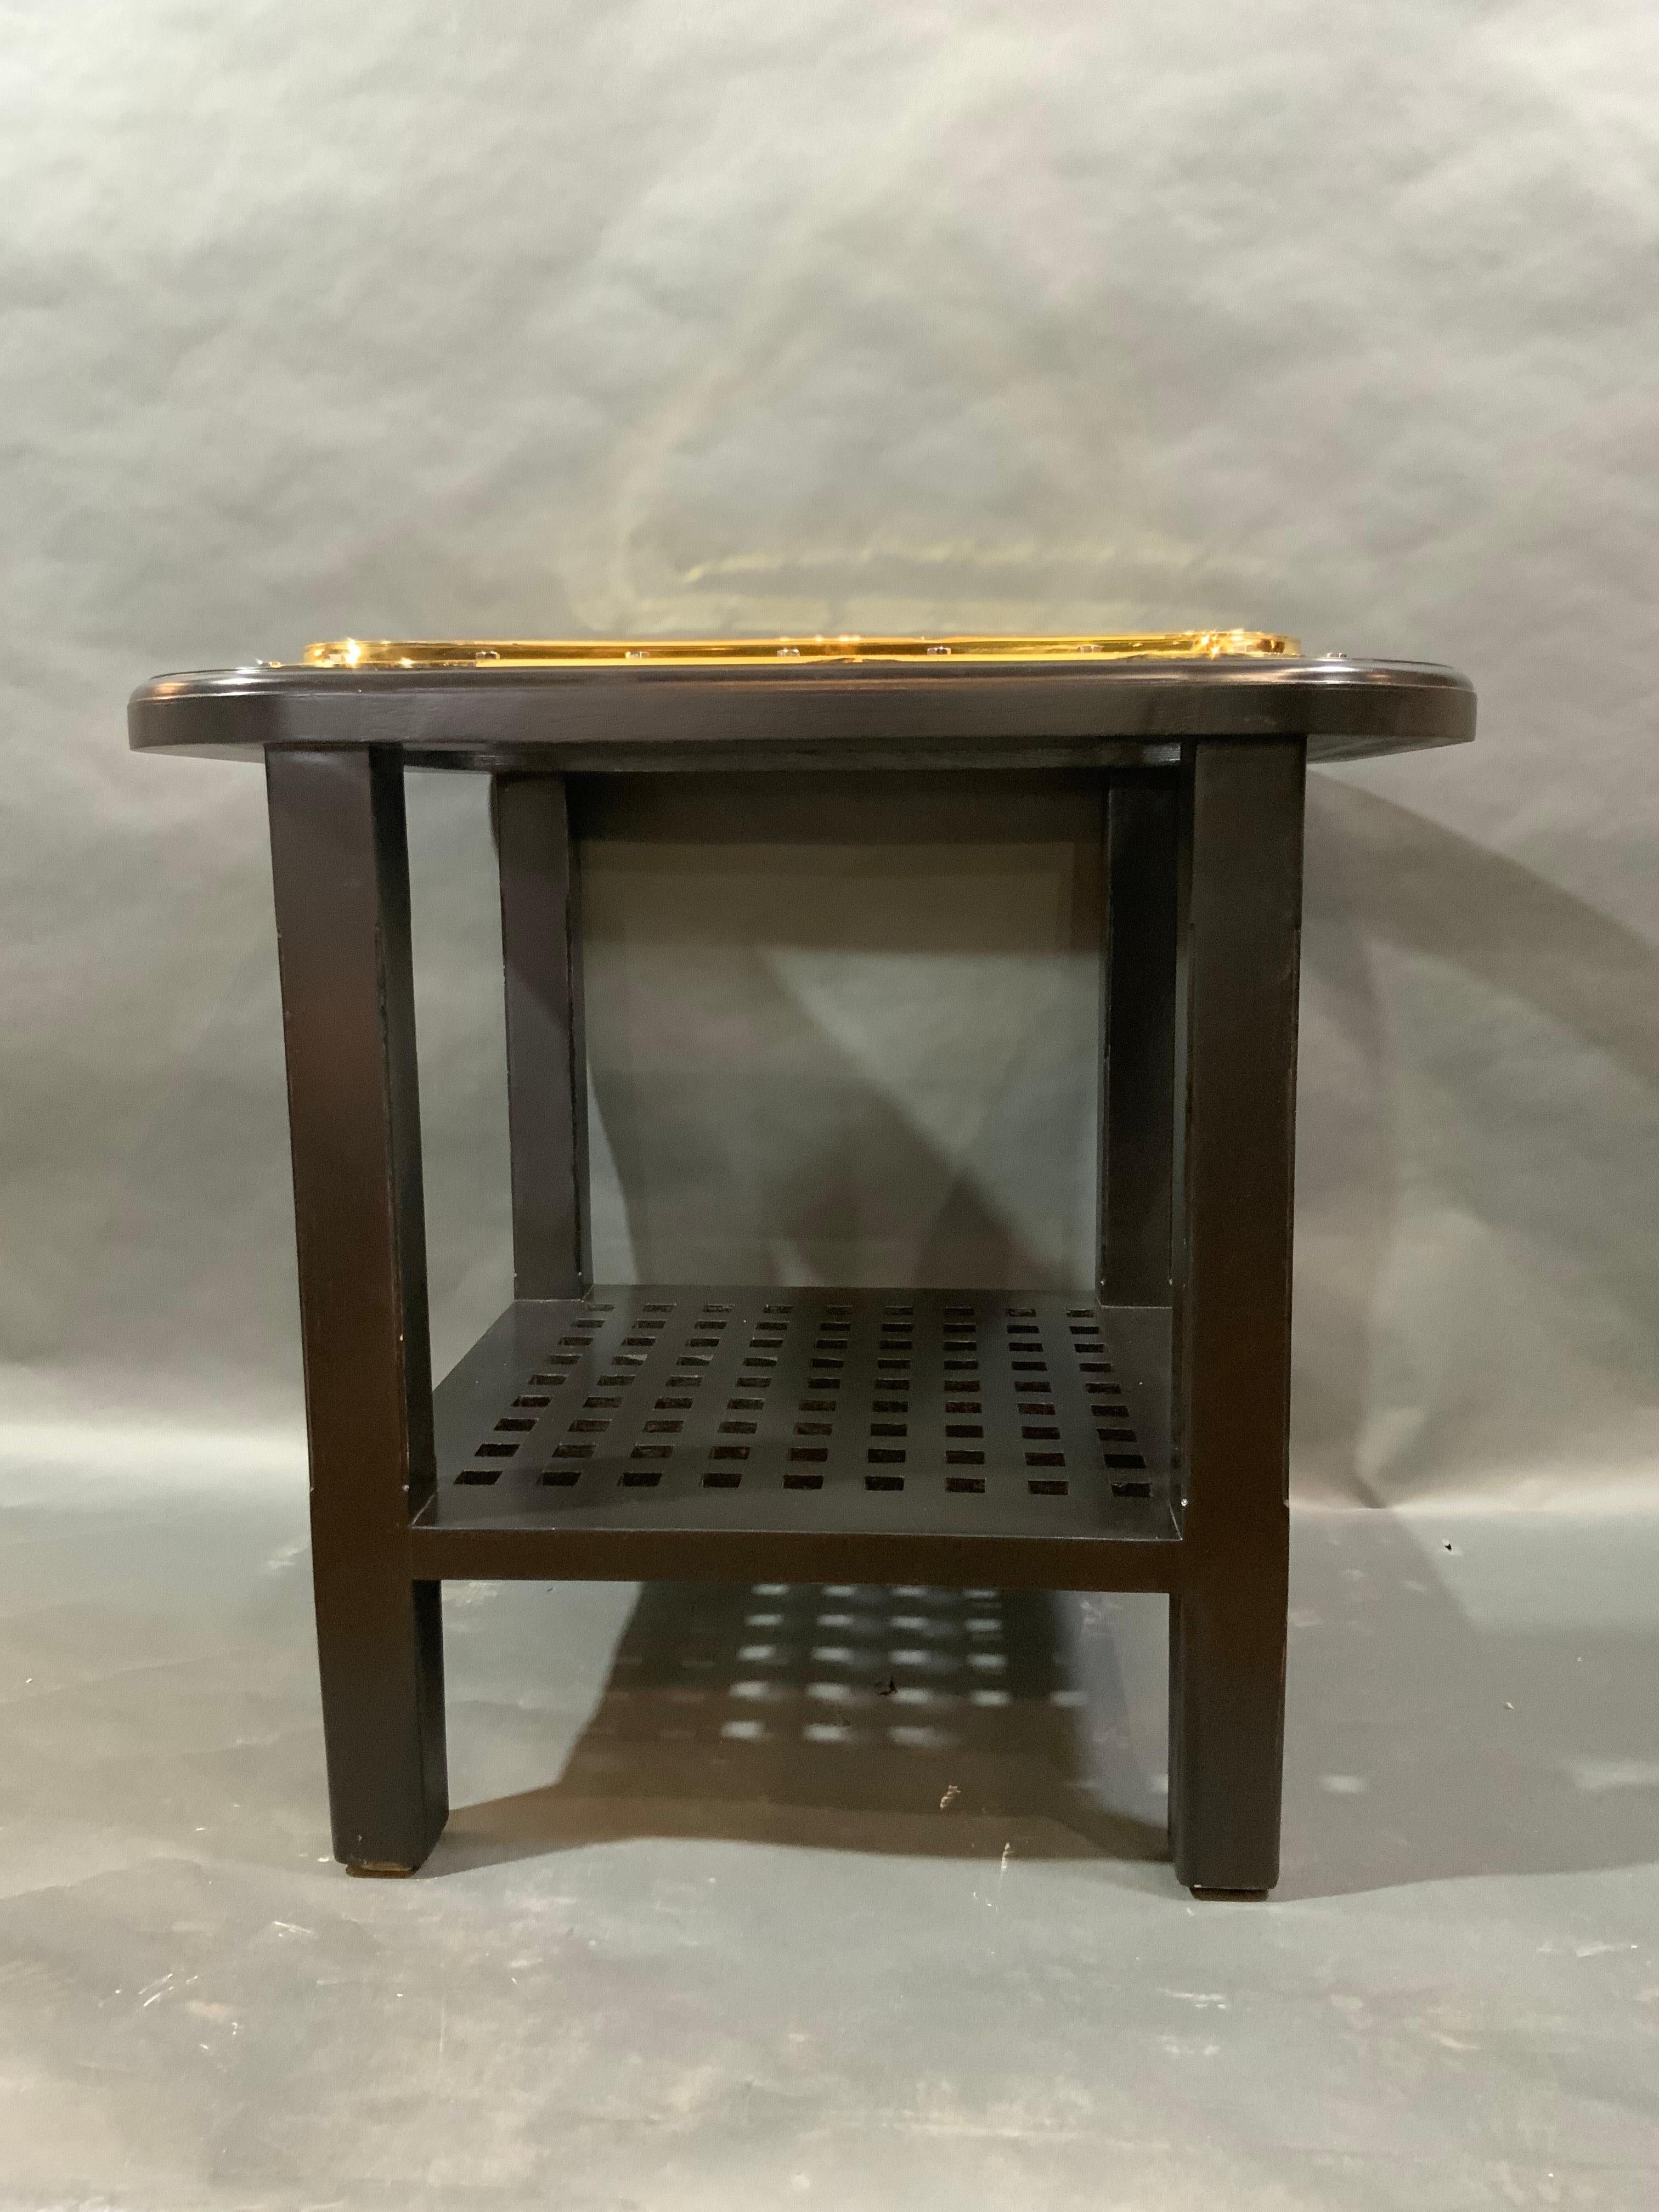 Authentic solid brass ships porthole that has been meticulously polished and lacquered, then fitted to a bistro height table. Table has four tapered legs and lower shelf in the form of a ship's grating. Maritime furniture at its best. Weight is 71